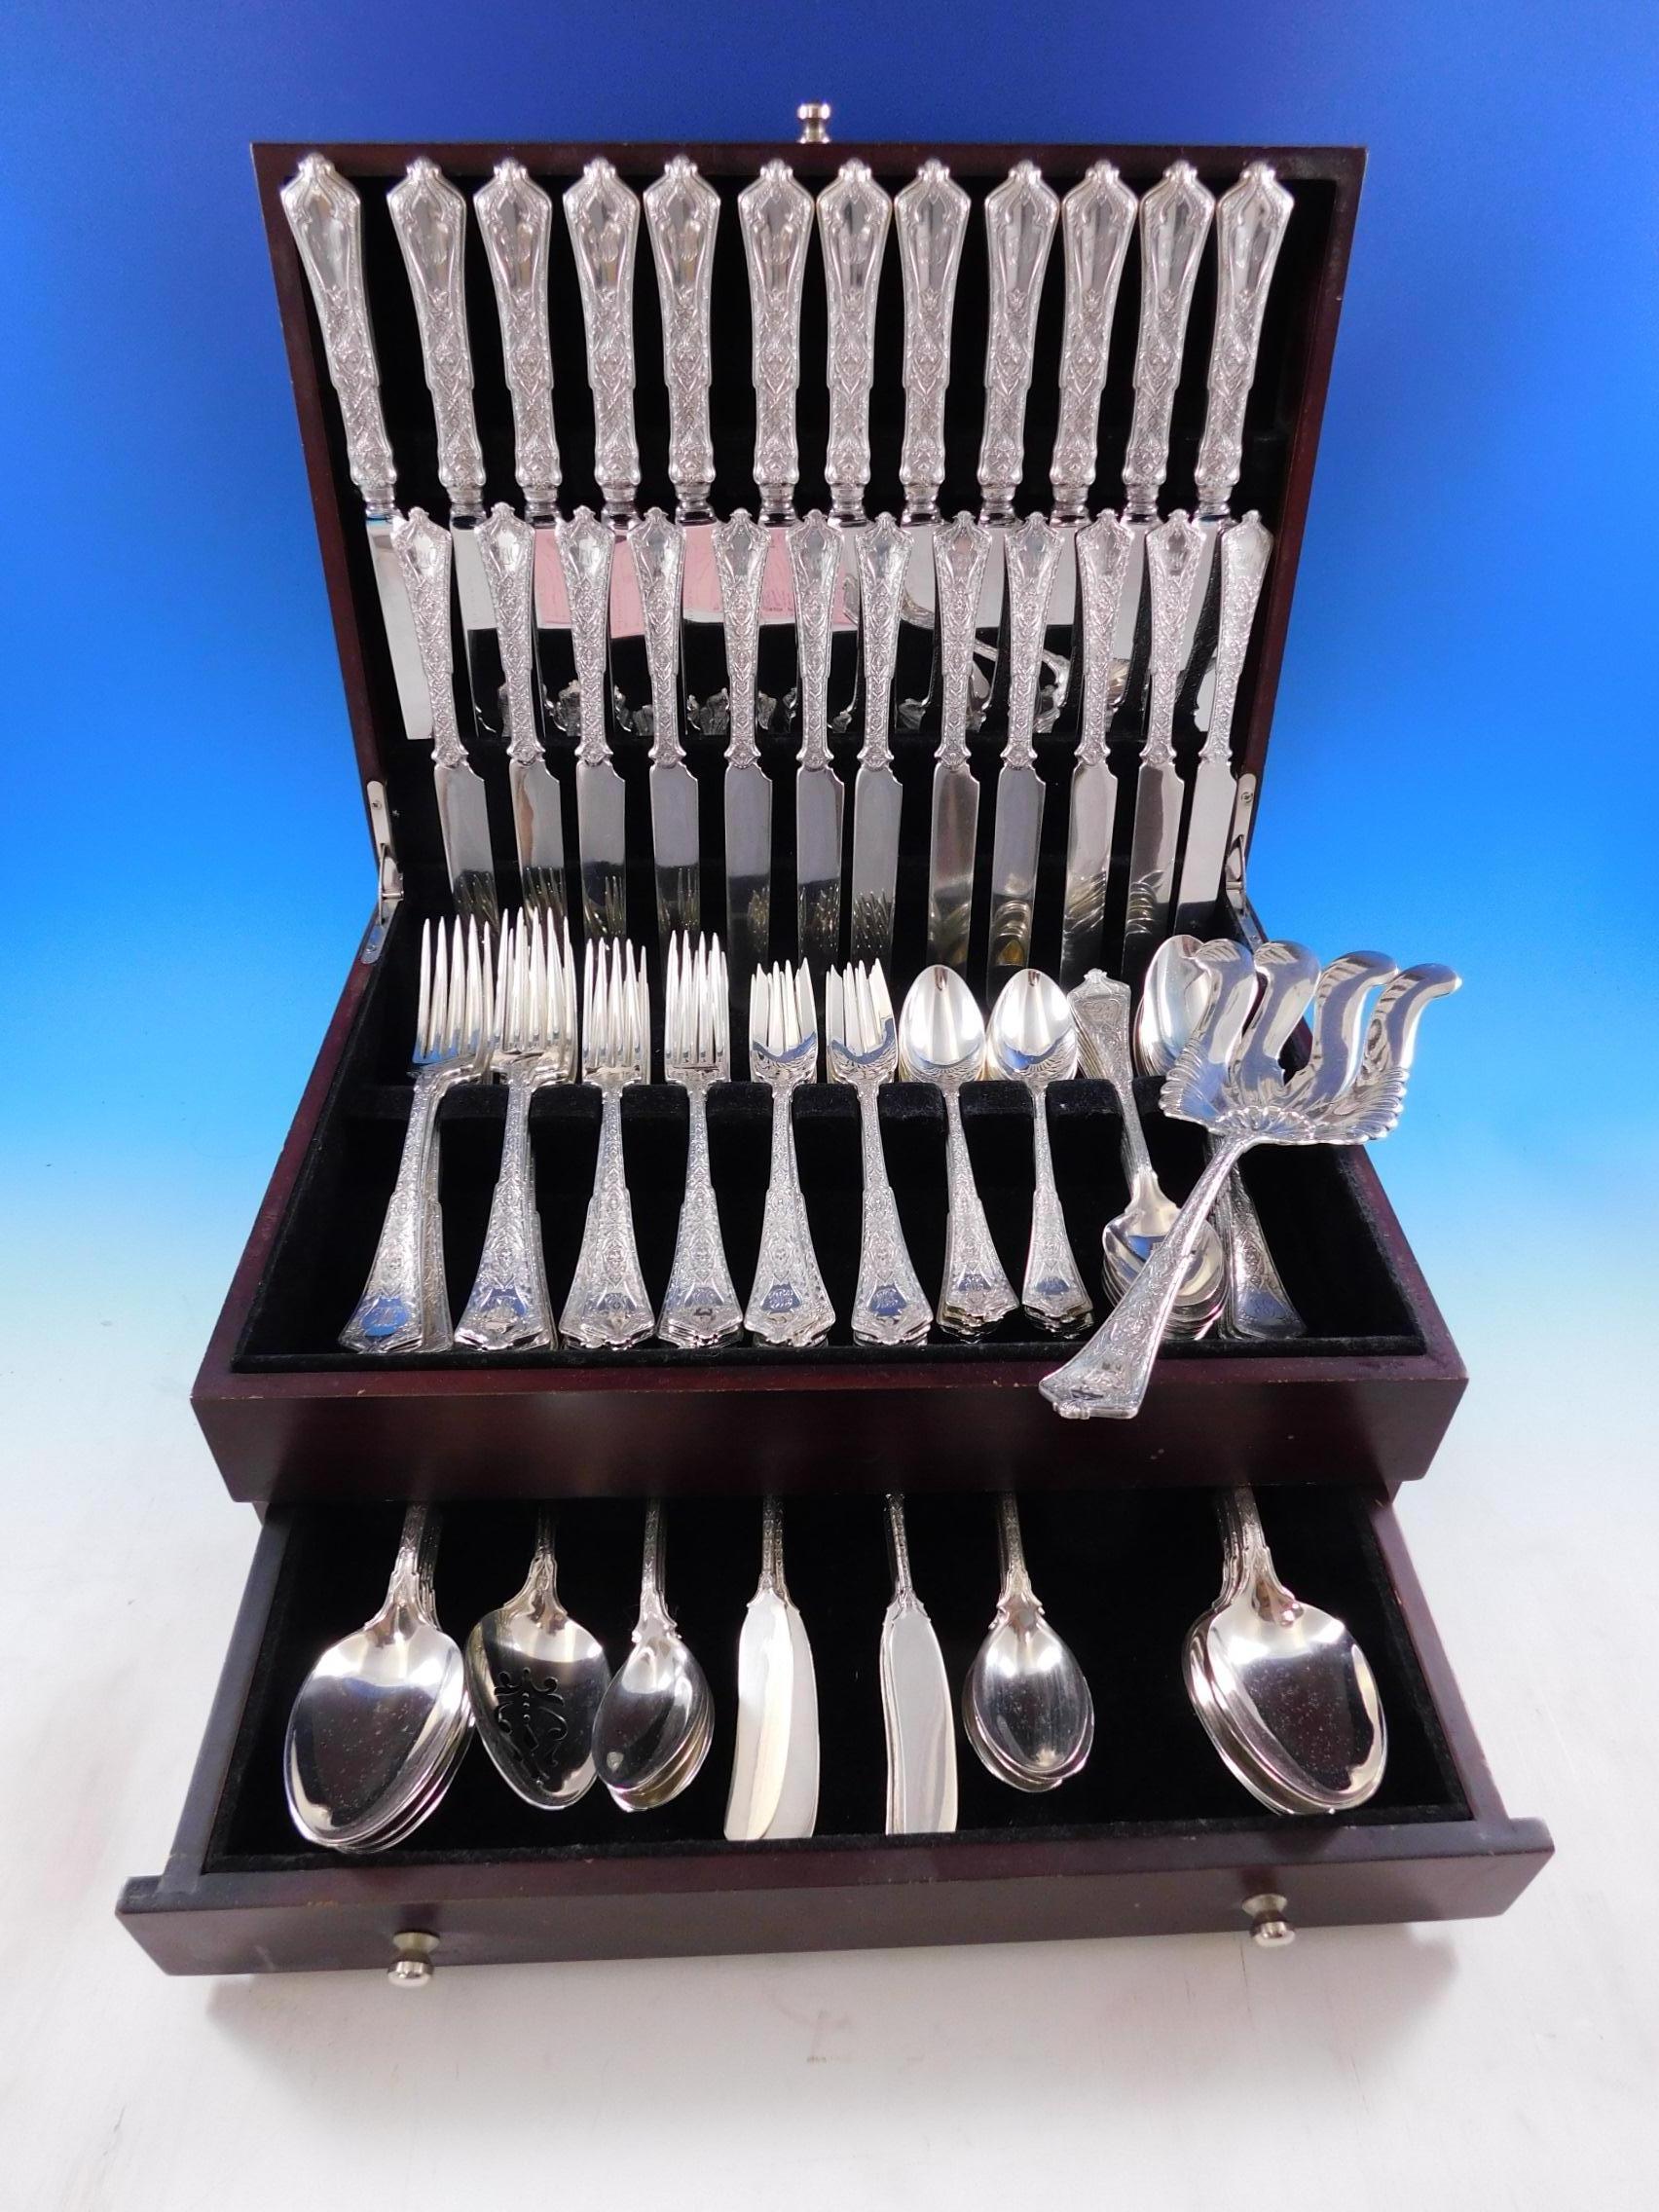 Exquisite Persian by Tiffany & Co. sterling silver flatware set - 122 pieces. This set includes:

12 dinner size knives w/blunt stainless blades, 10 1/8